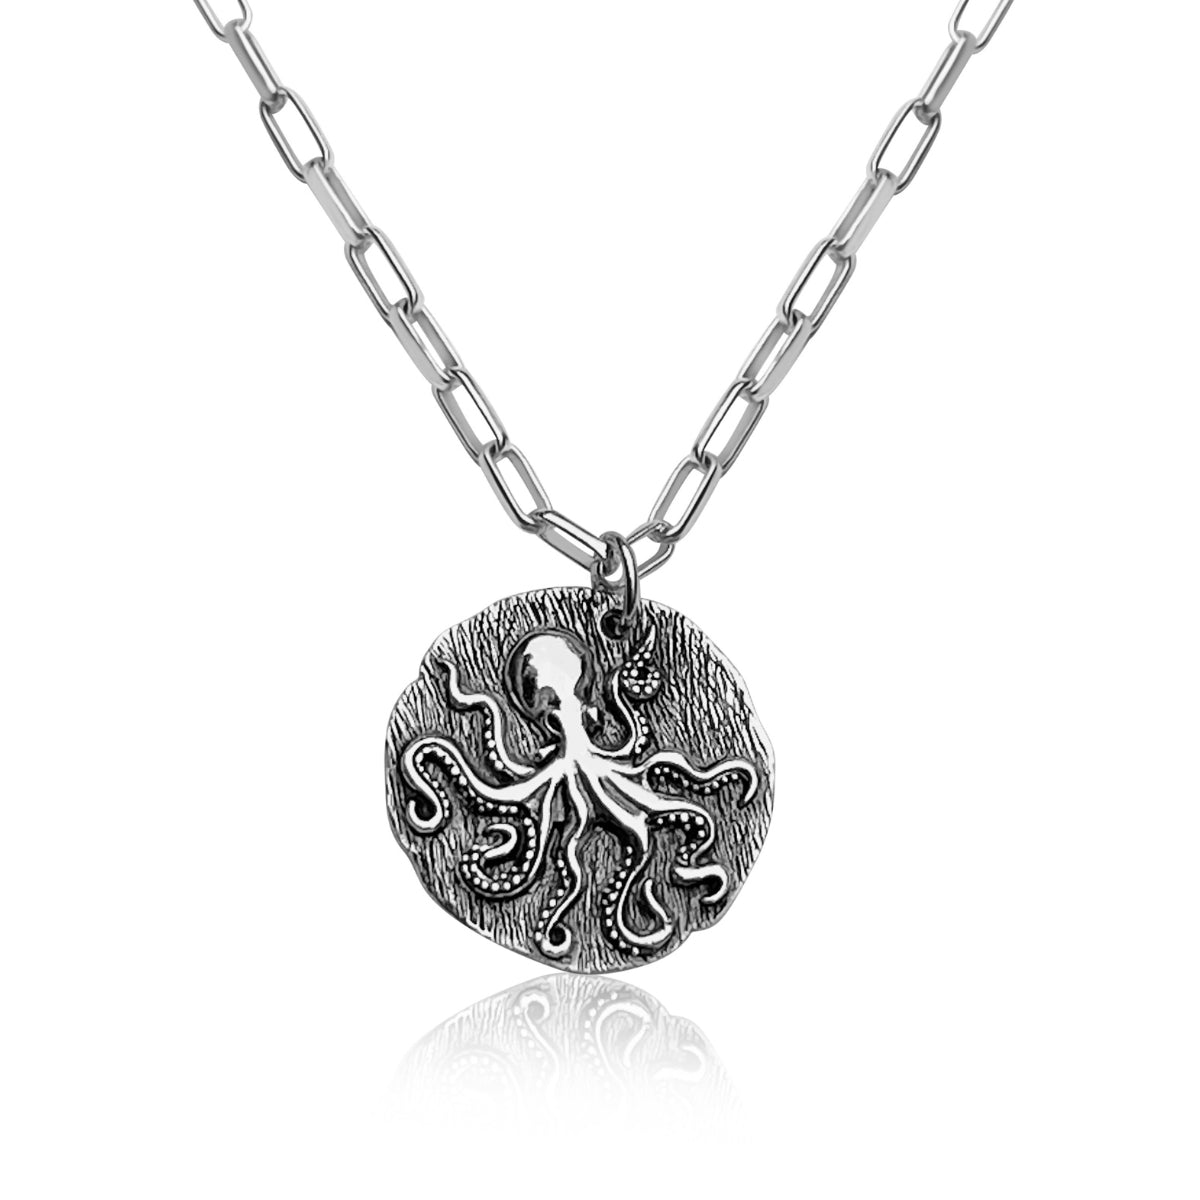 As you adorn yourself with this "Champion of Change: Octopus Necklace", let it symbolize your own journey of transformation, a reminder that just like the octopus, you too are a champion of change in the tapestry of life.